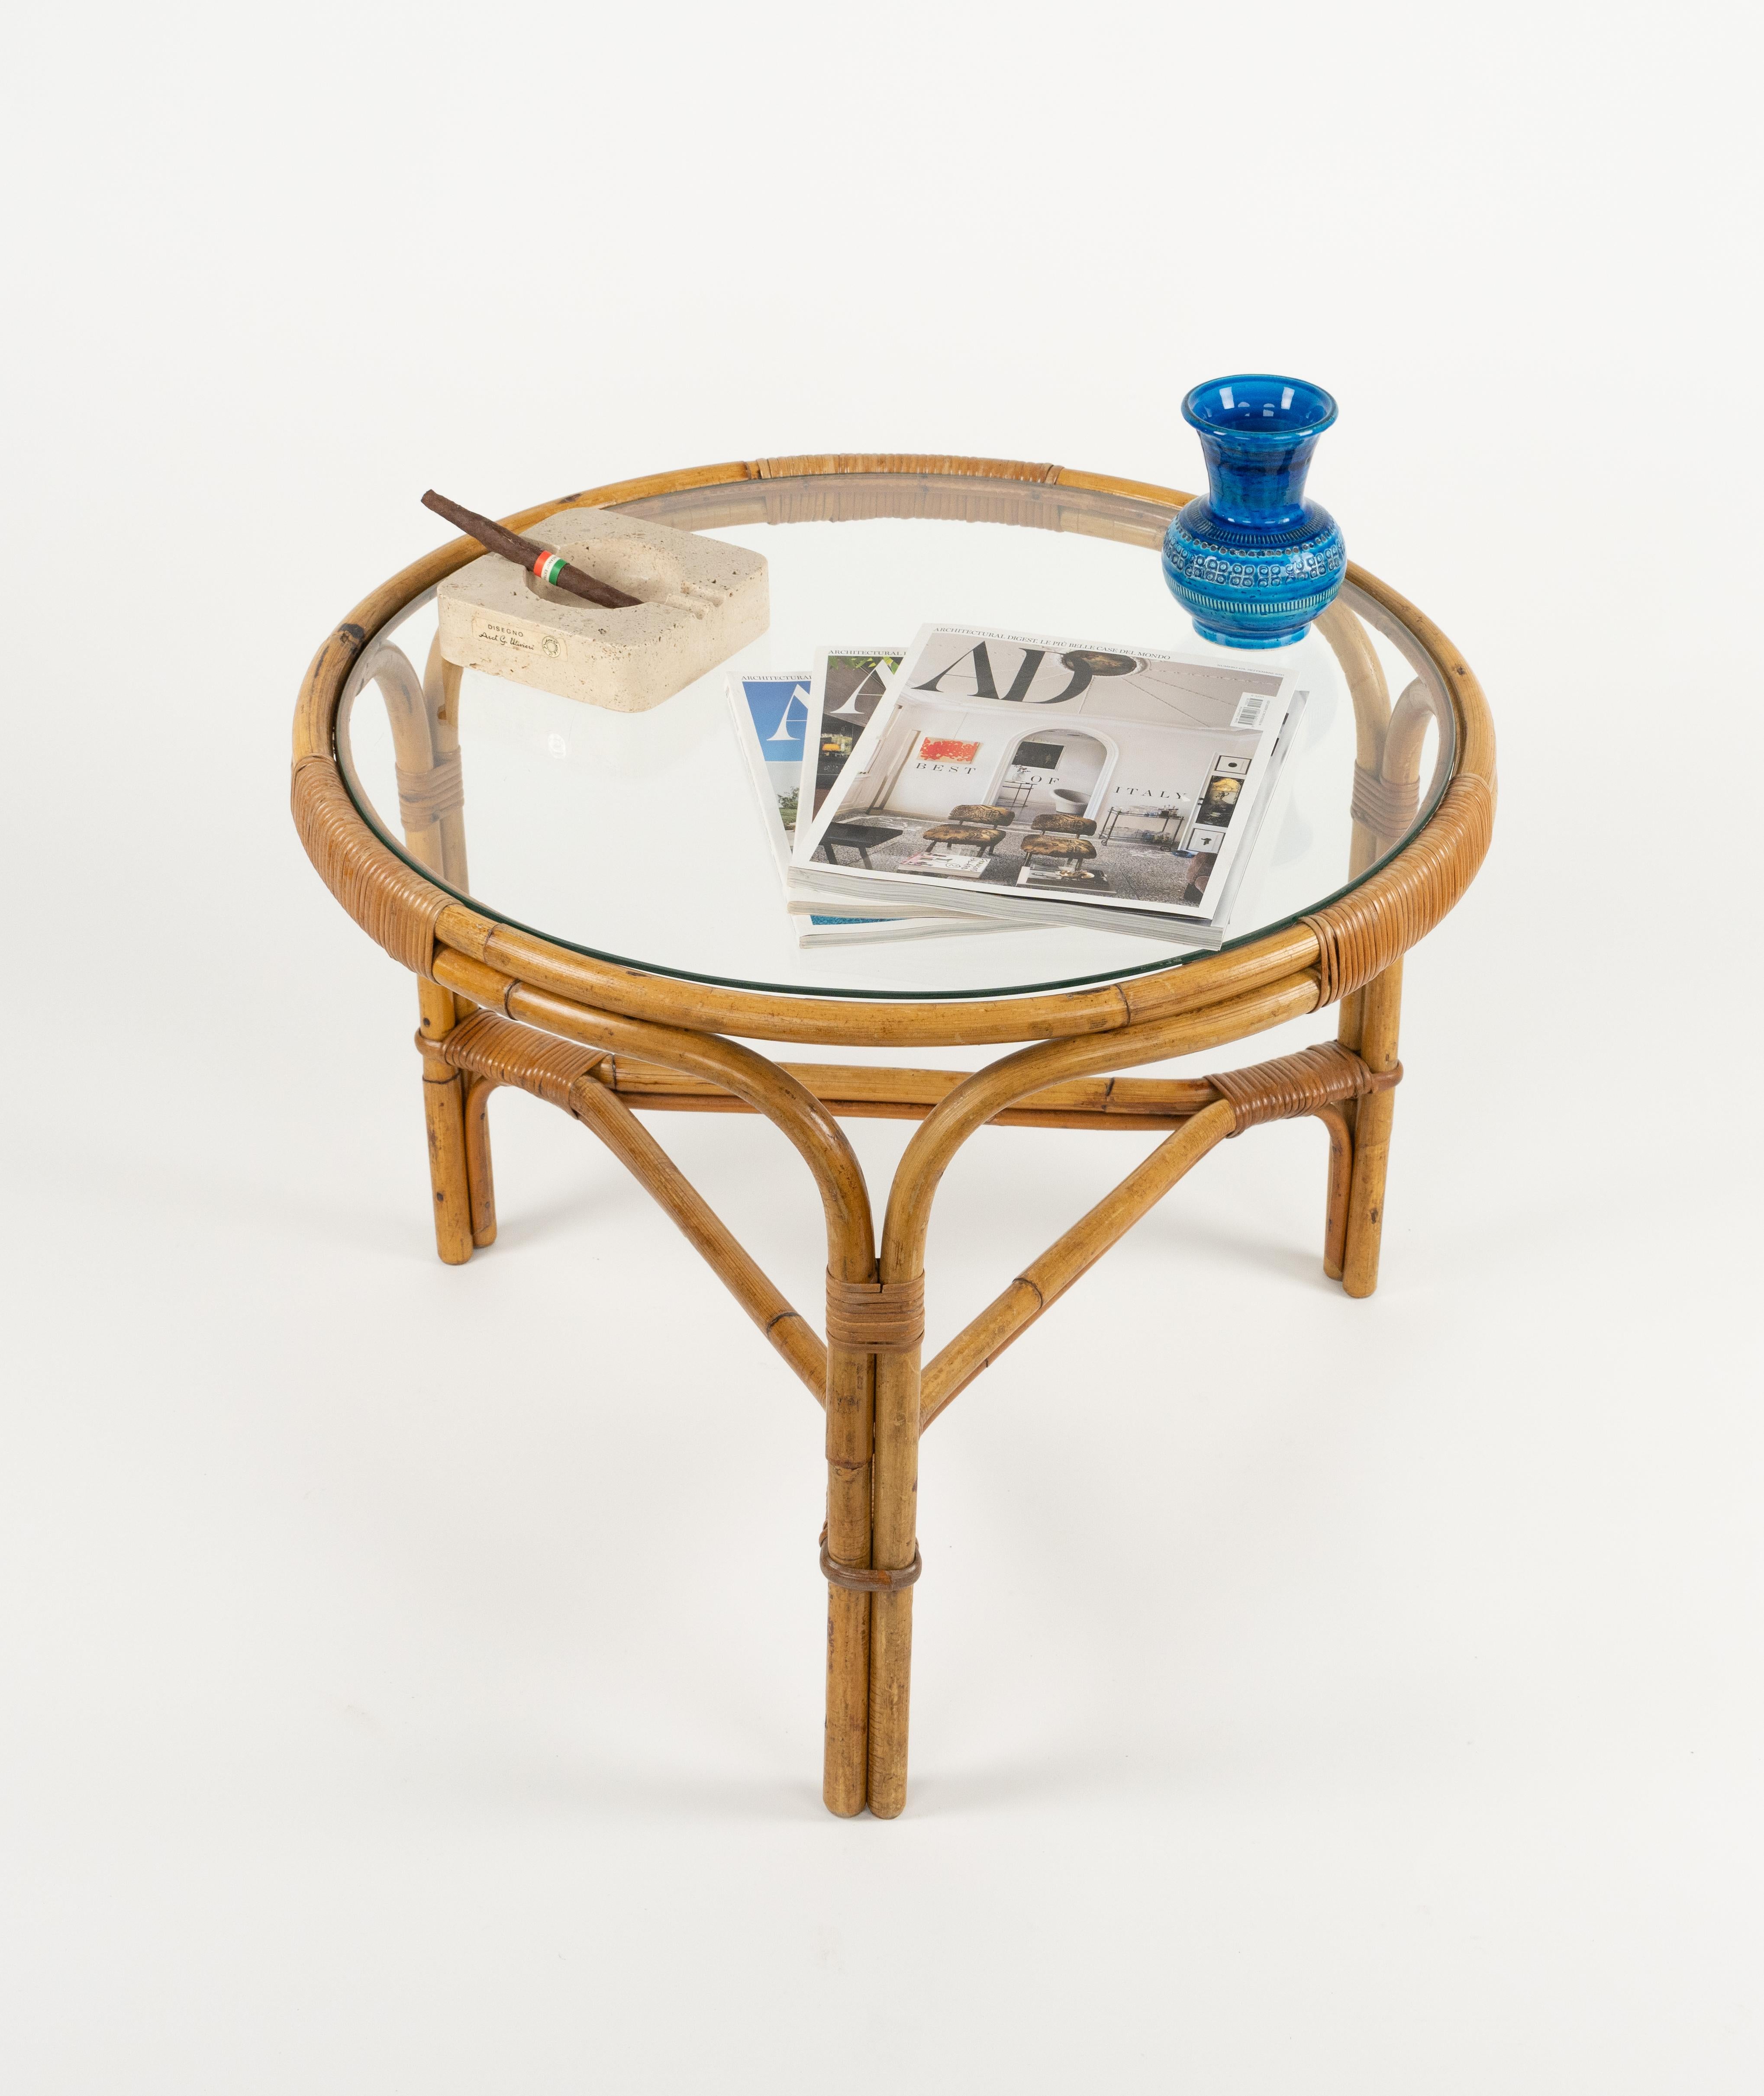 Midcentury Round Coffee Table in Bamboo, Rattan and Glass, Italy 1960s For Sale 3